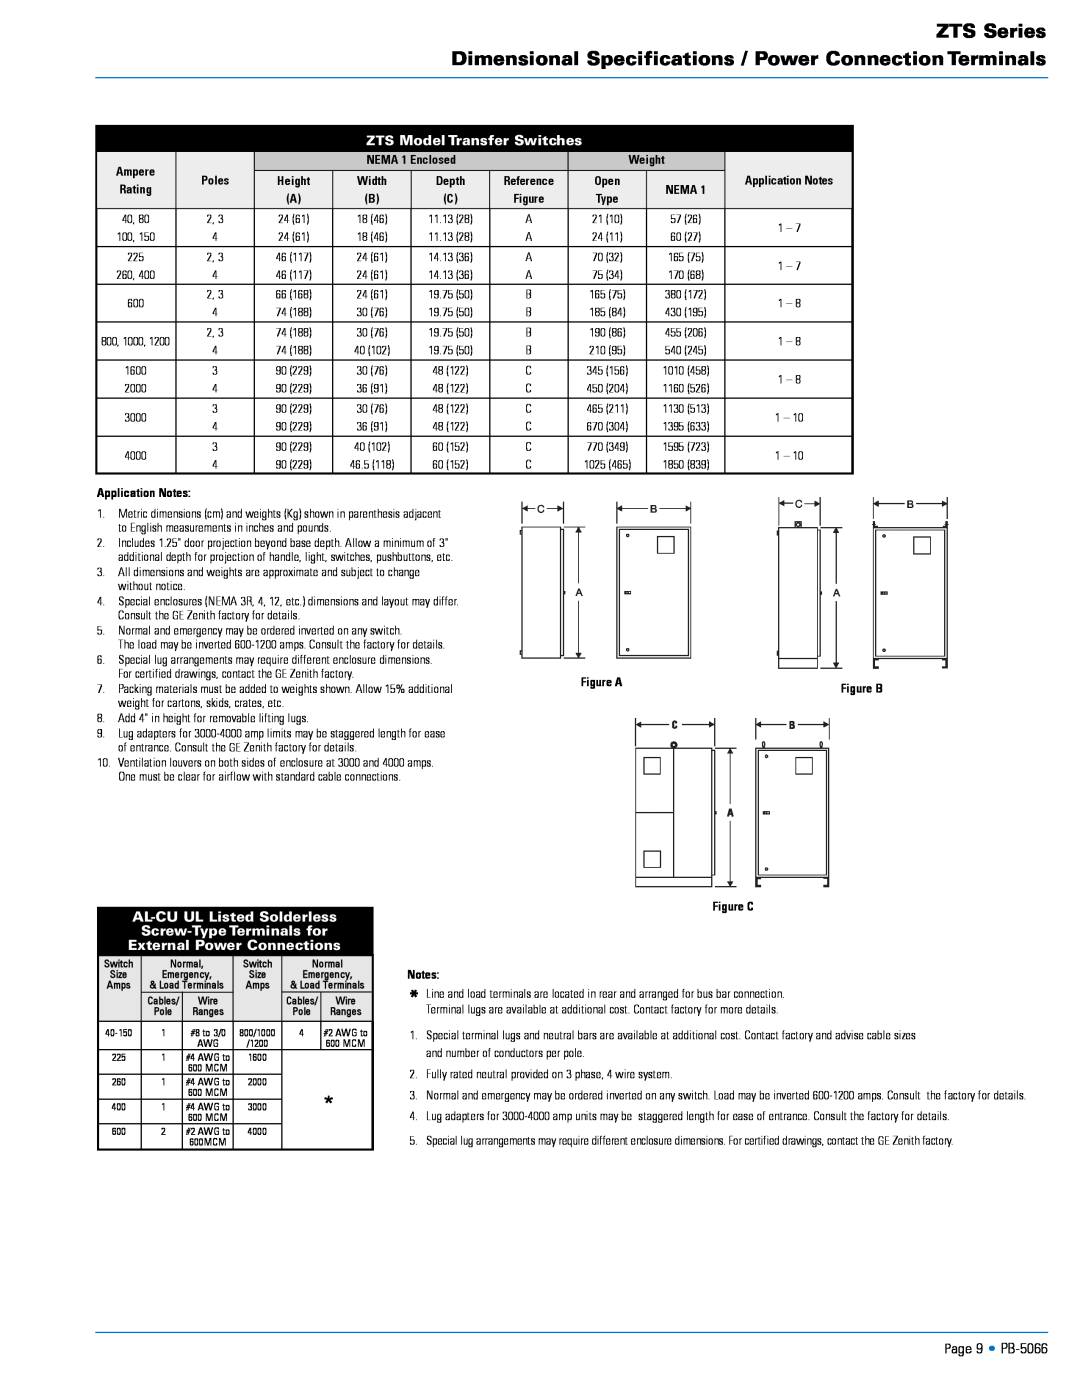 3G Green Green Globe ZTS Series Dimensional Specifications / Power Connection Terminals, ZTS Model Transfer Switches 